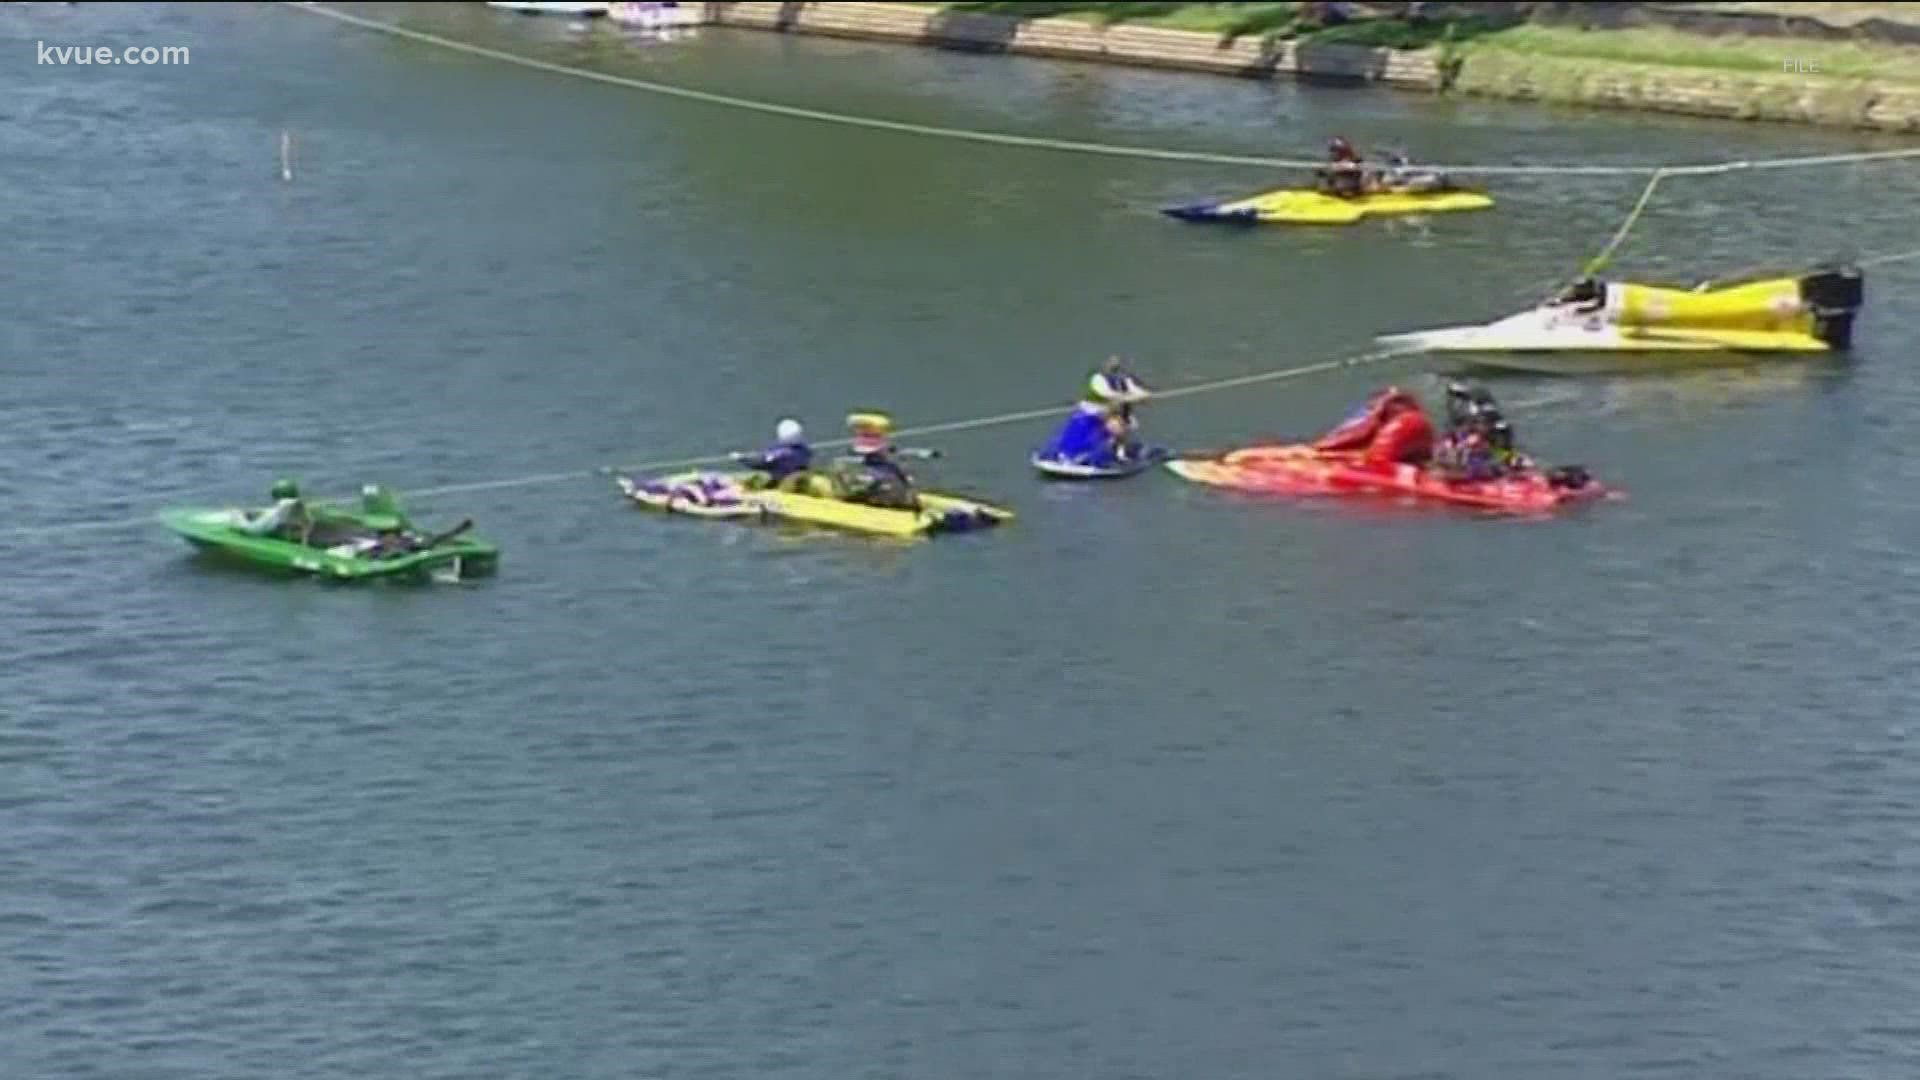 This comes as LakeFest returns to Marble Falls this weekend, drag boat races and all.